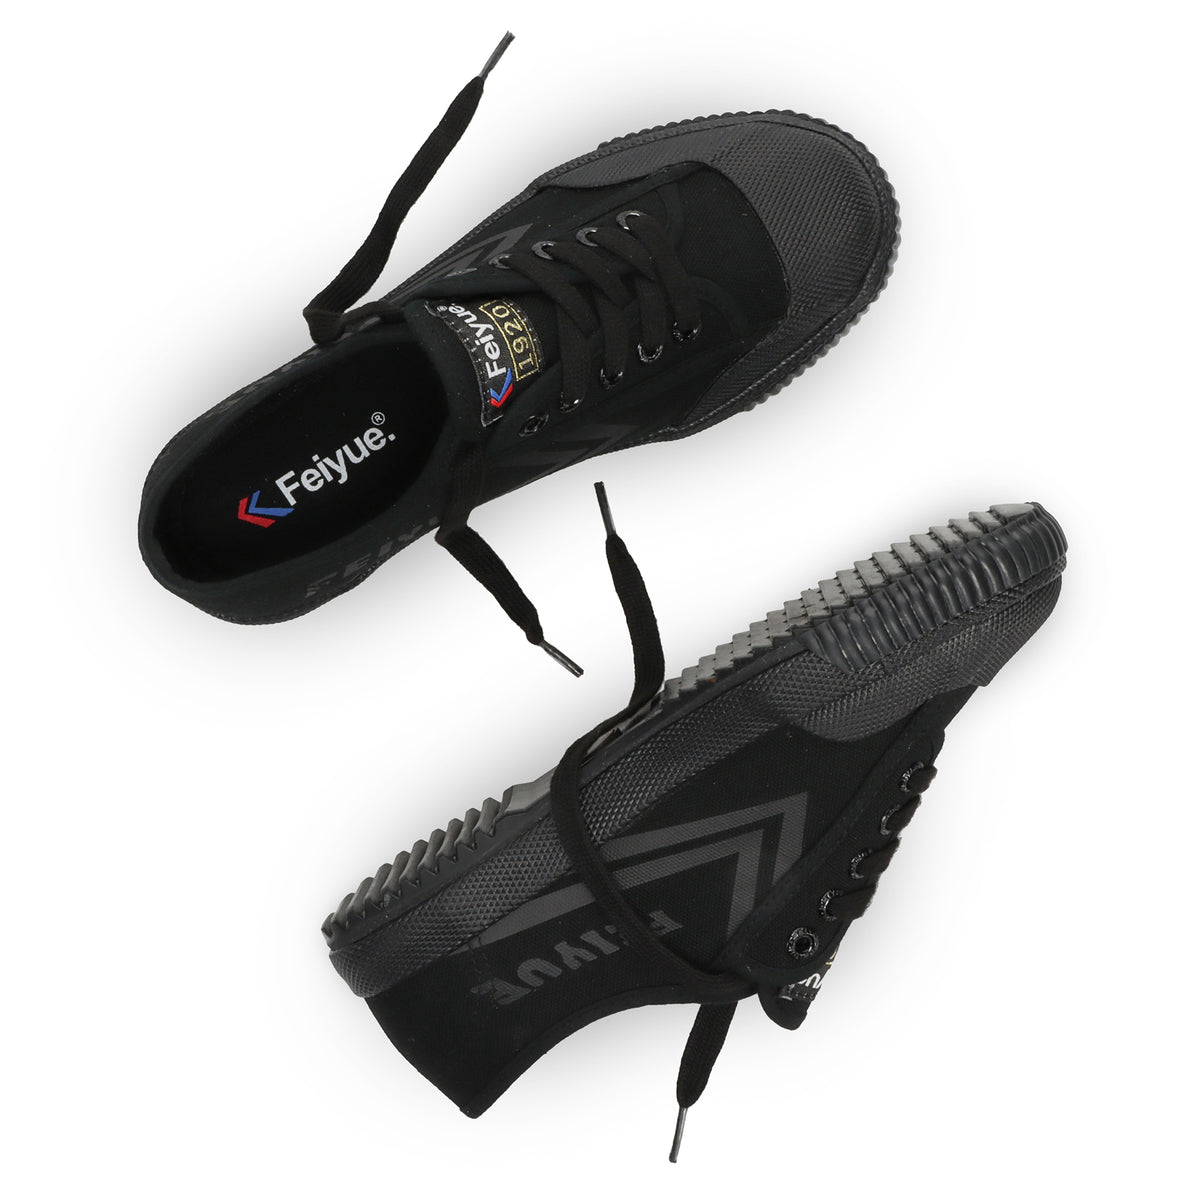 Feiyue Martial Arts Shoes, Black Low-Top on Sale –